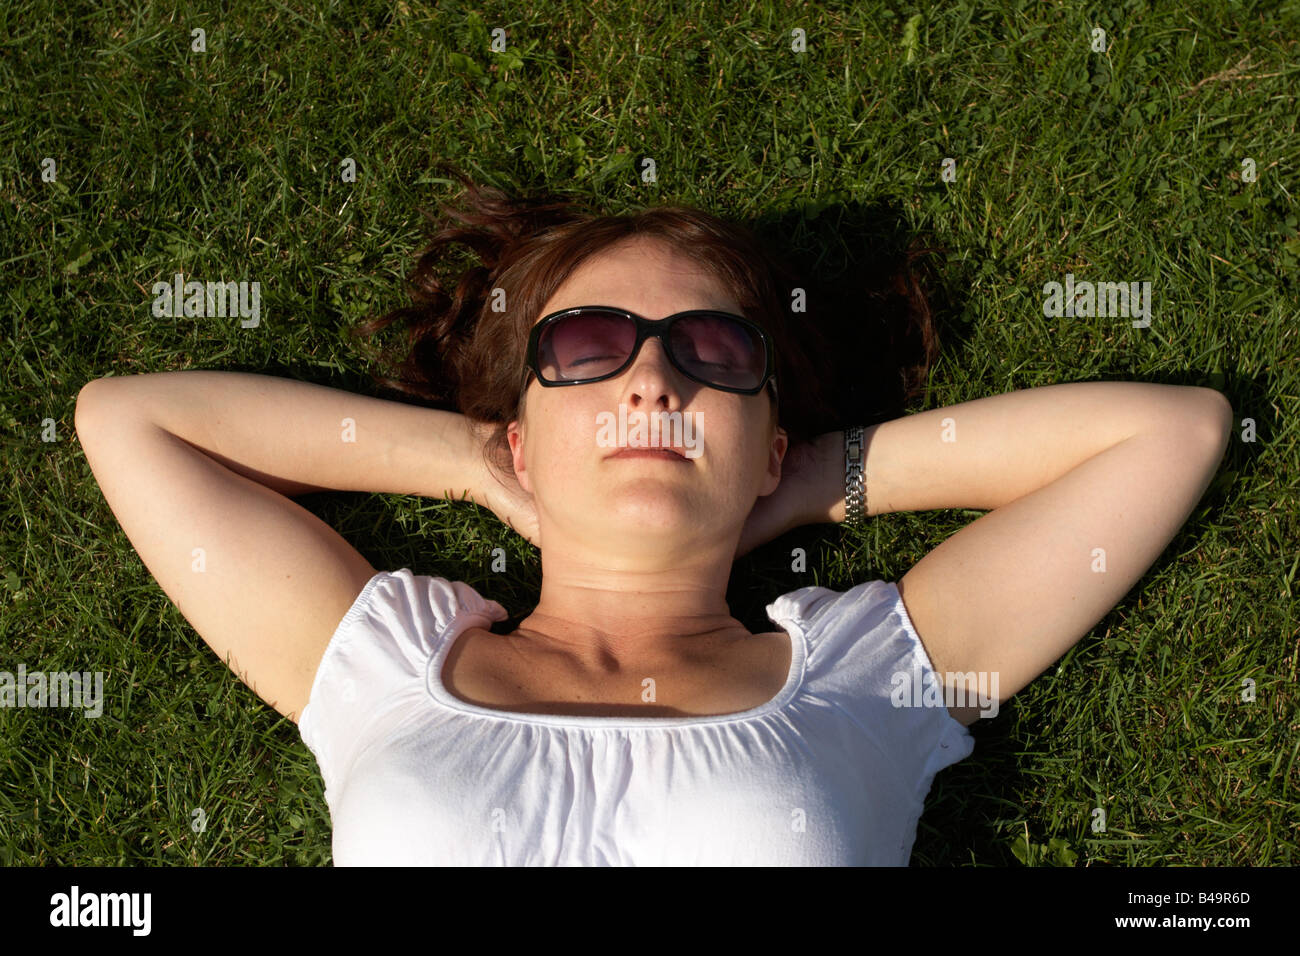 Woman outdoors laying on her back sunbathing on grass wearing sunglasses. Overhead view. Stock Photo